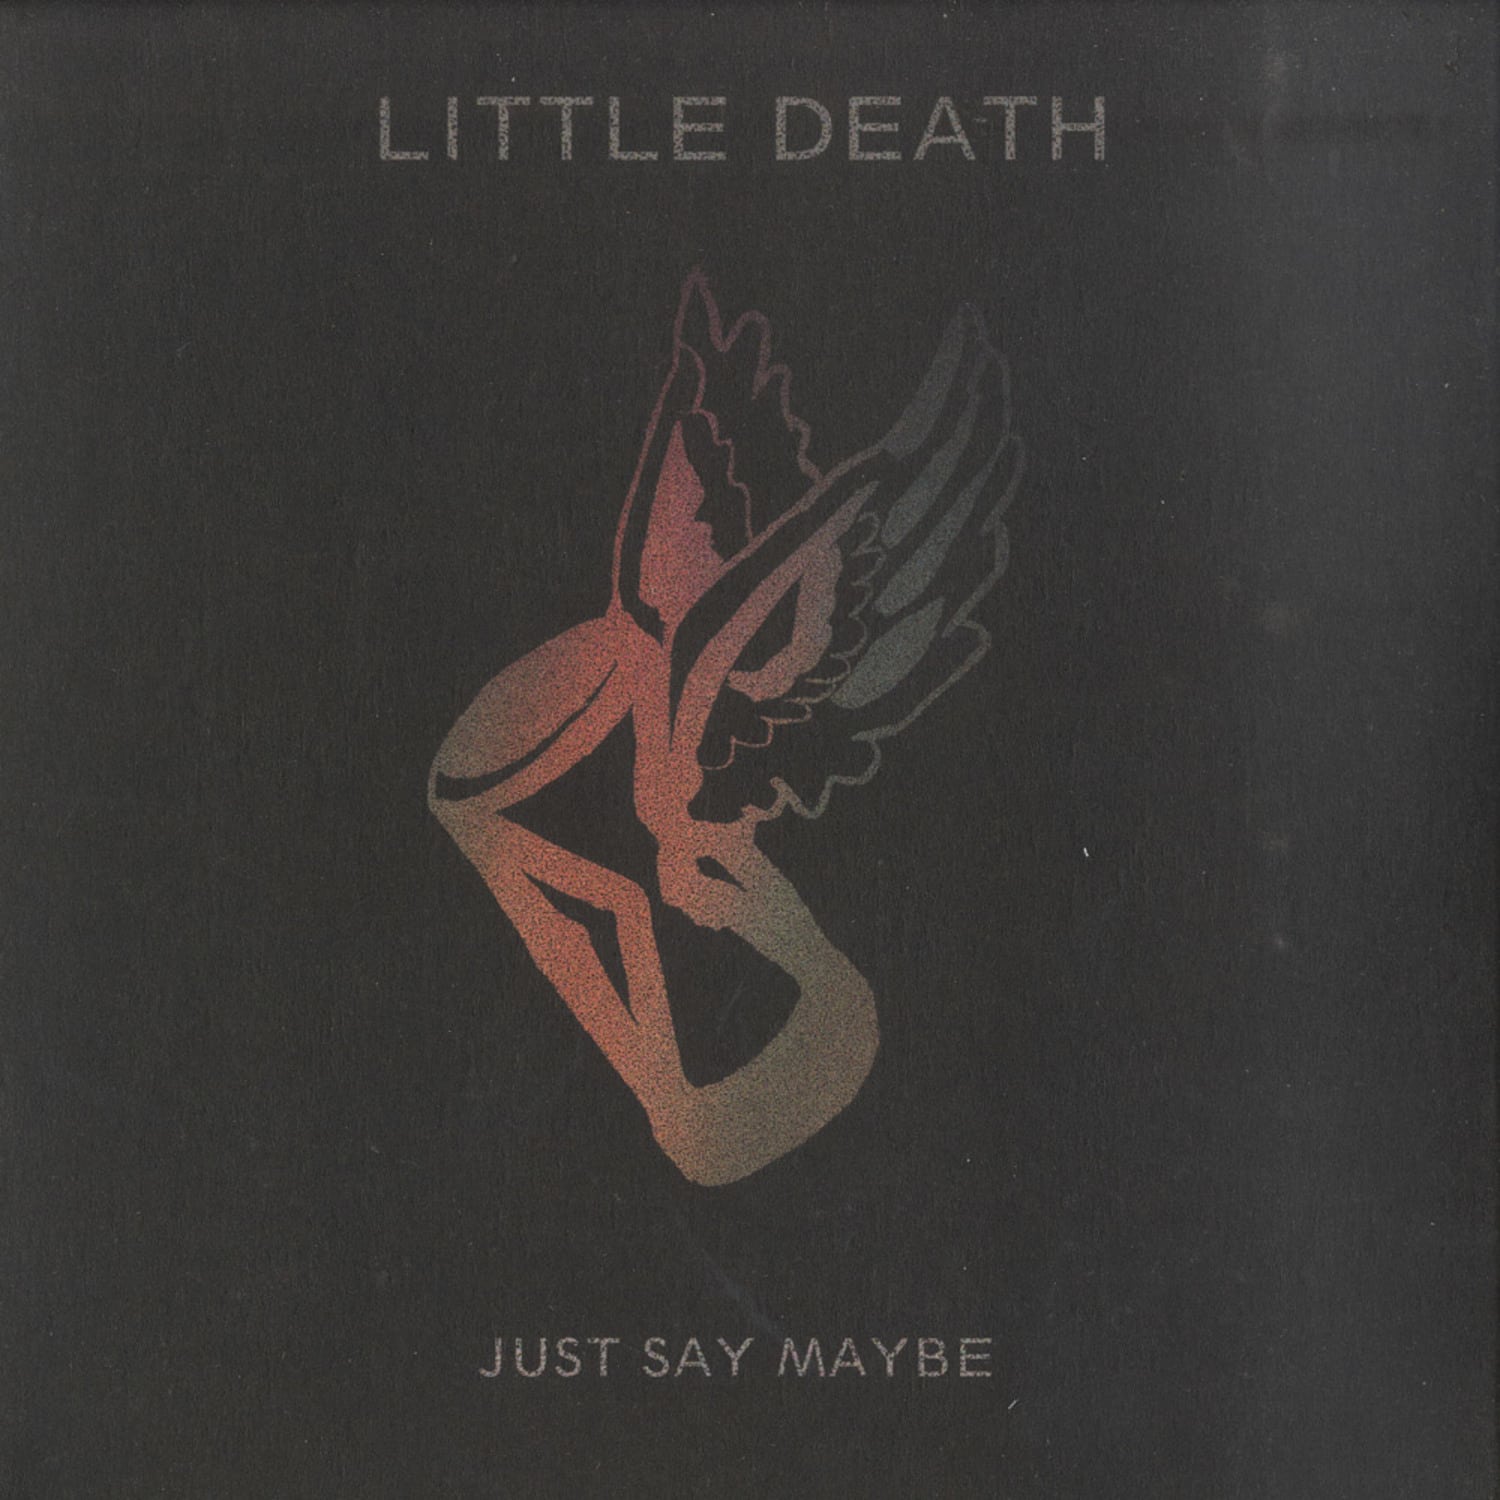 Little Death - JUST SAY MAYBE 